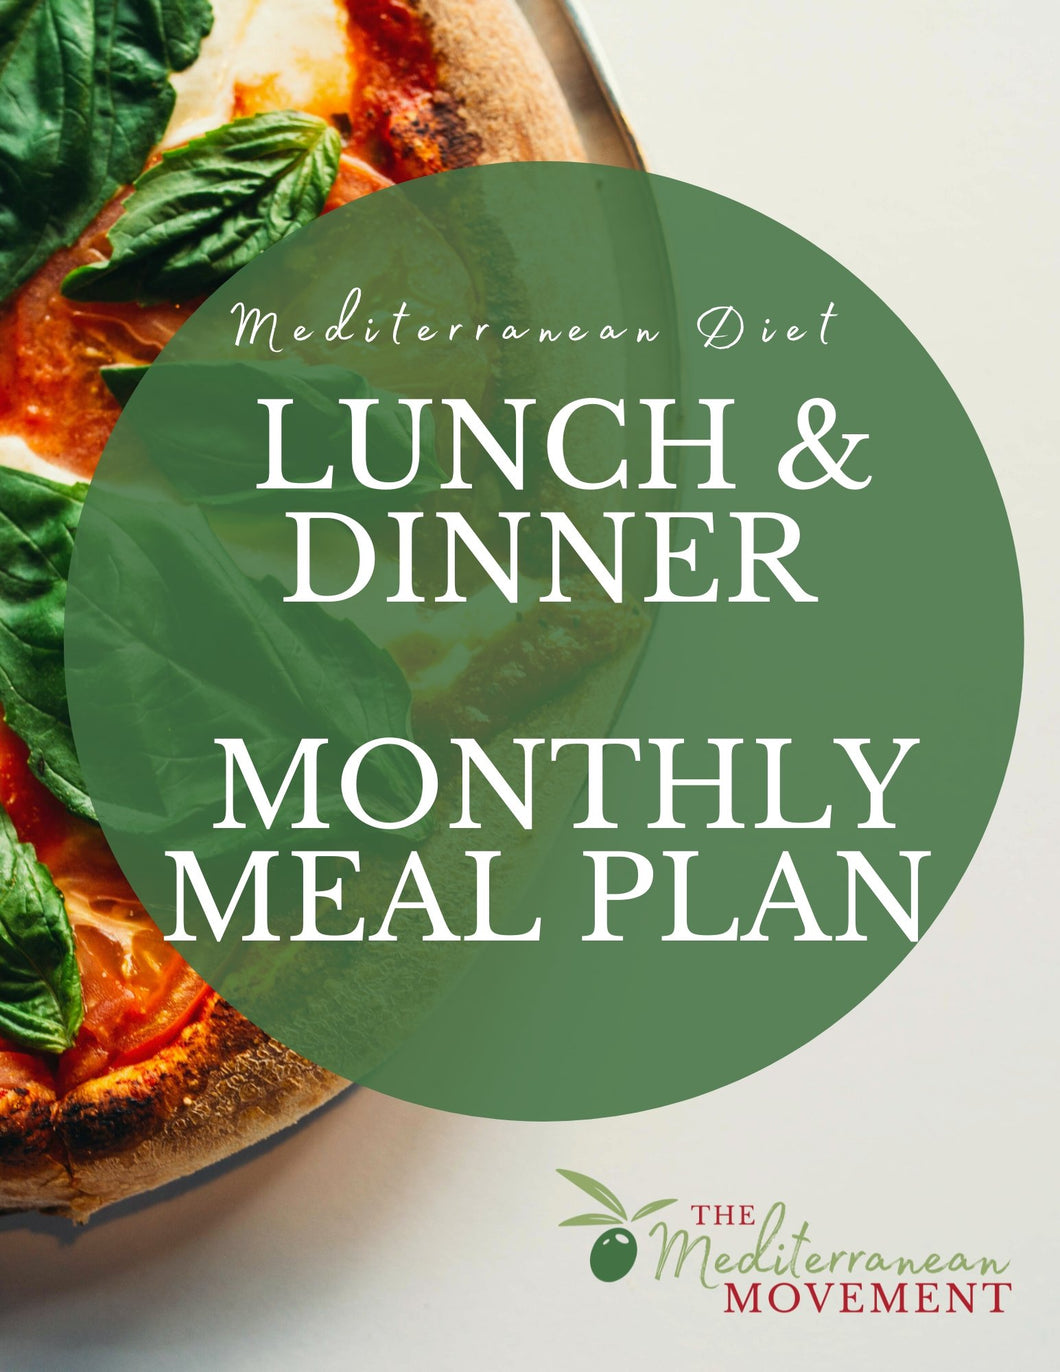 Meal Plans (Lunch & Dinner only)